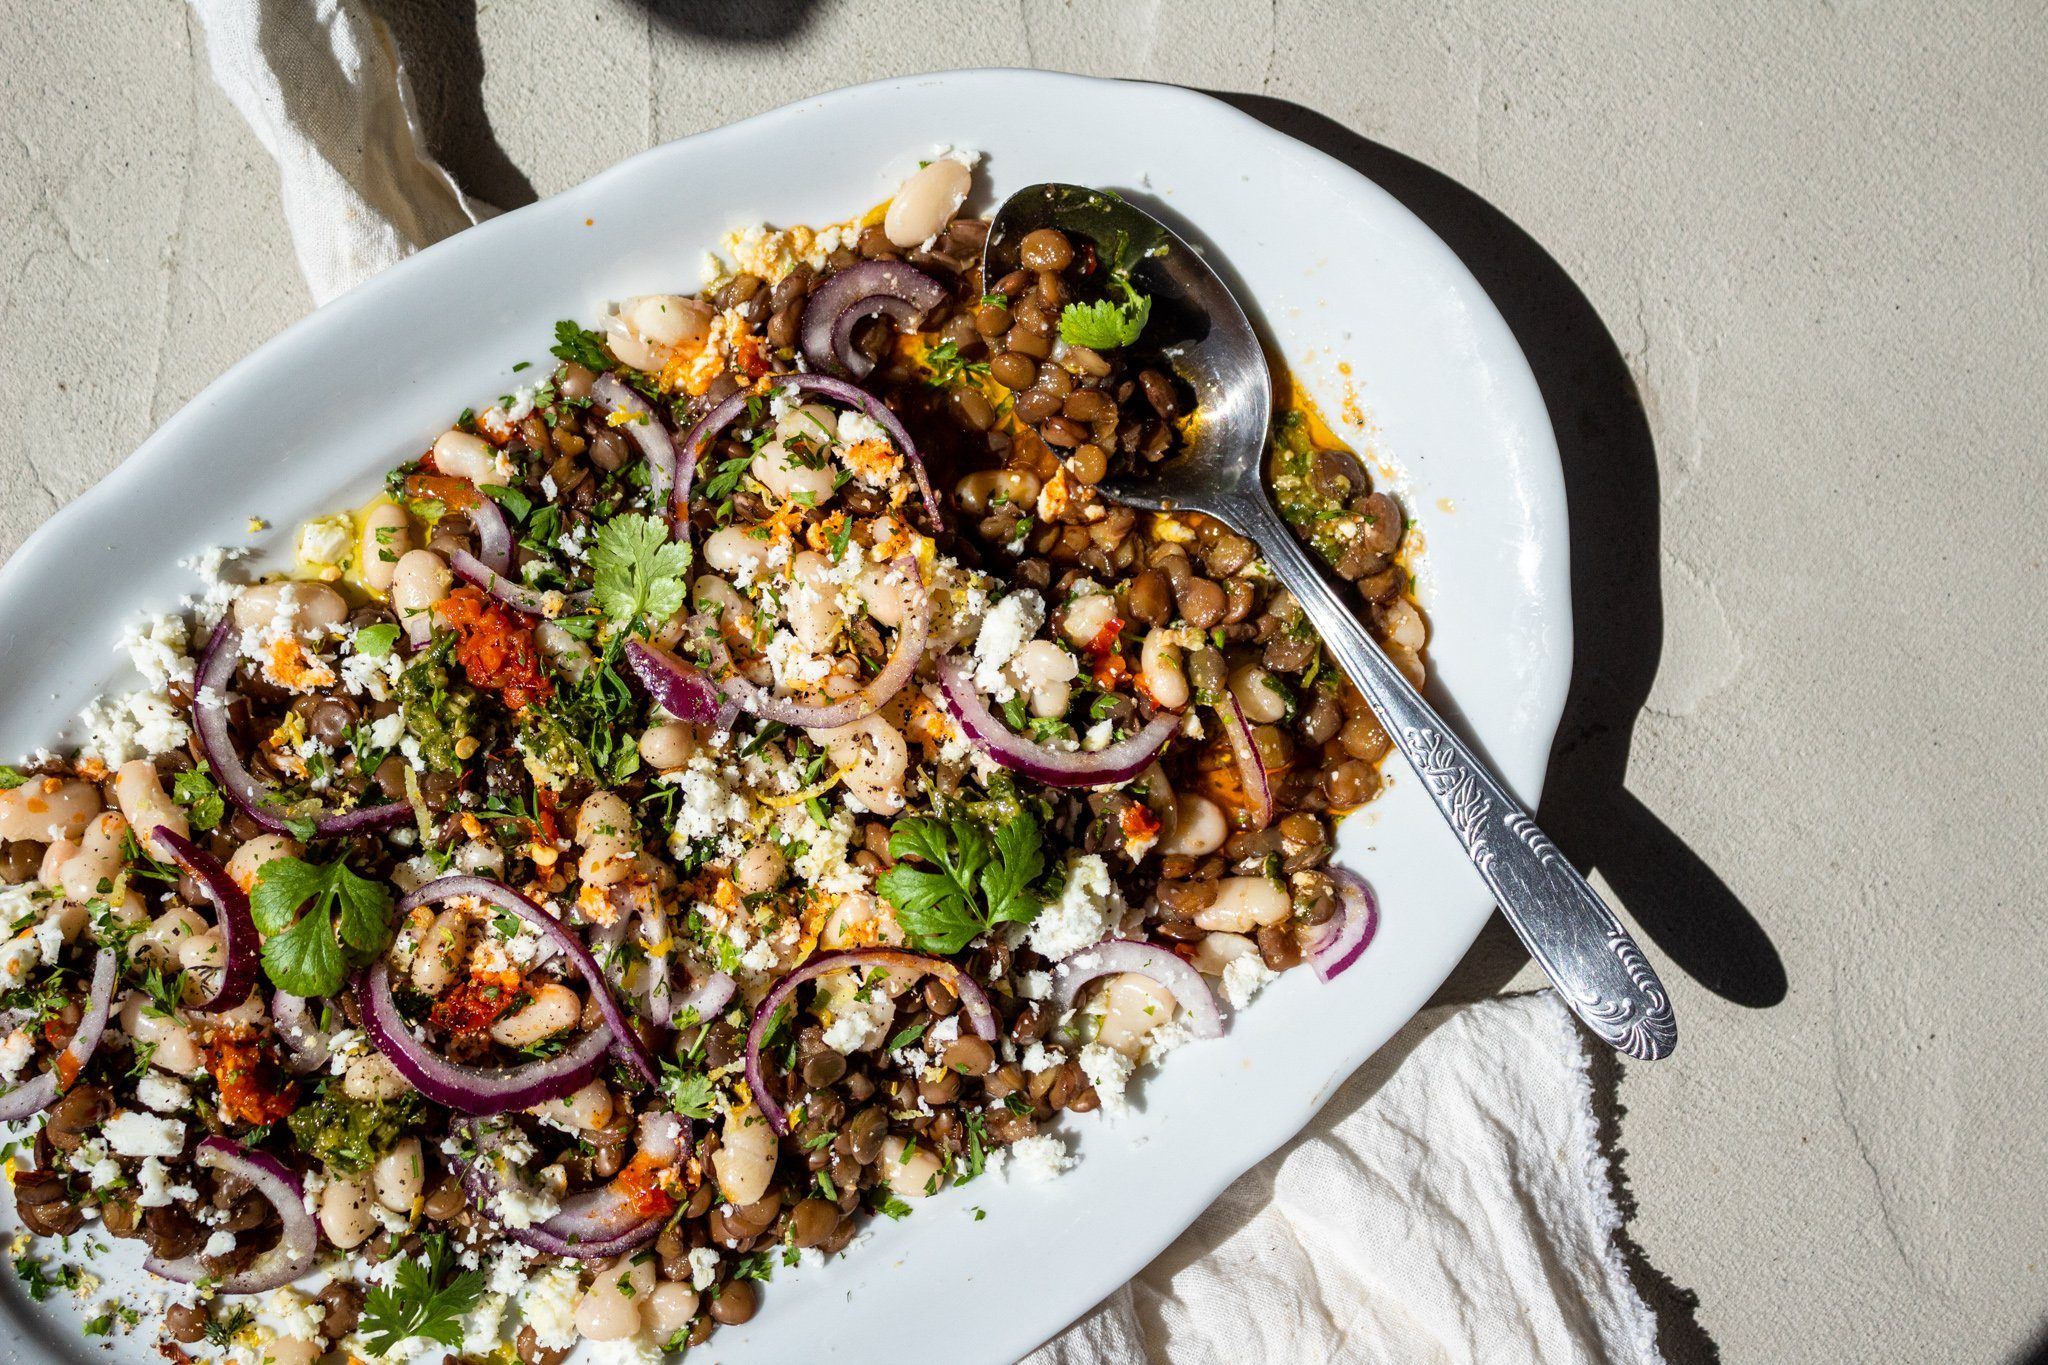 Feta with Spiced Lentils, Chickpeas and Red Onion